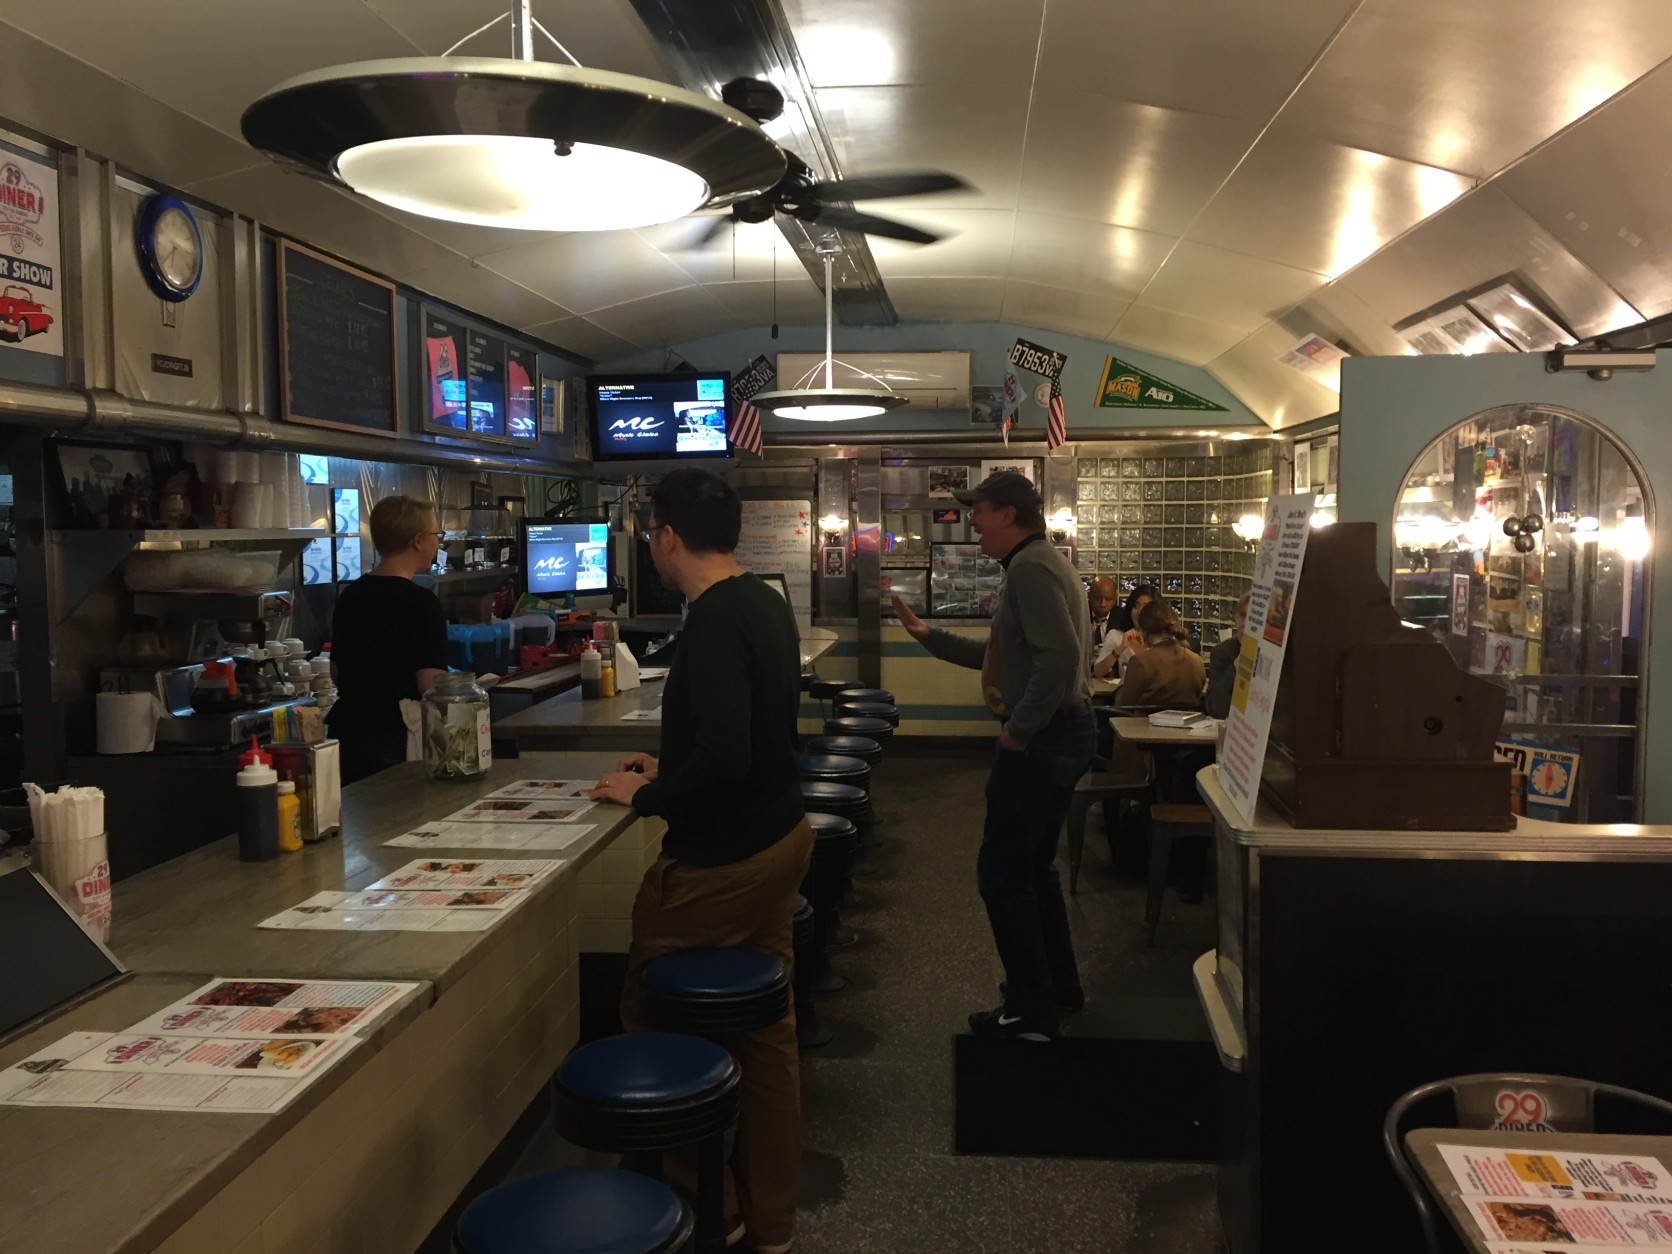 Inside 29 Diner in Fairfax, which has been open since 1947. (WTOP/Michelle Basch)